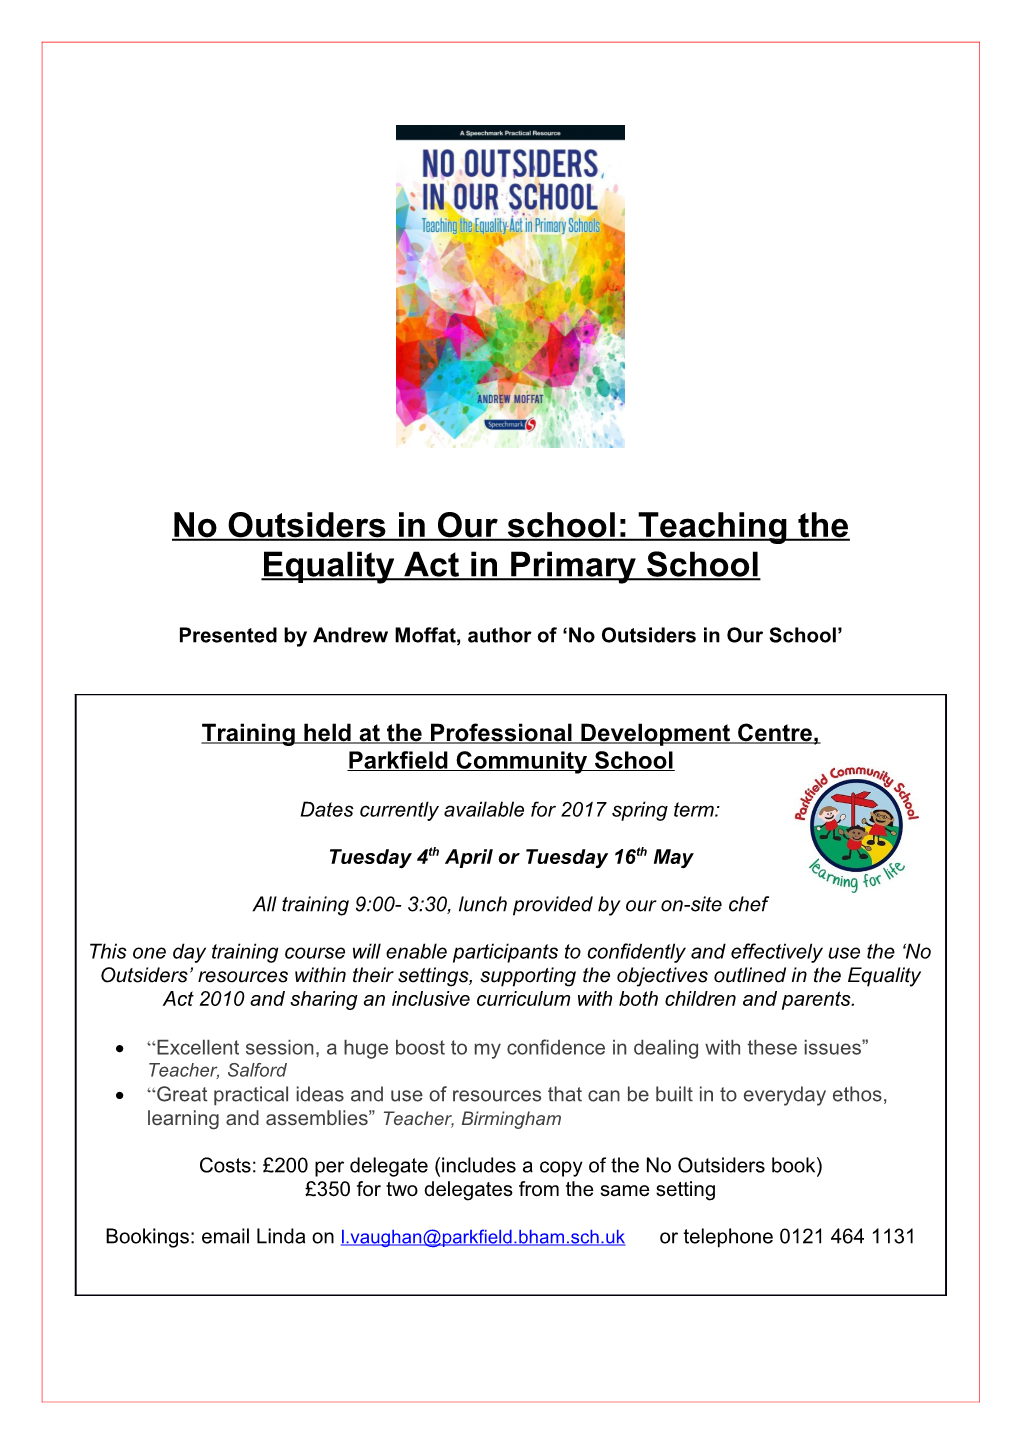 No Outsiders in Our School: Teaching the Equality Act in Primary School